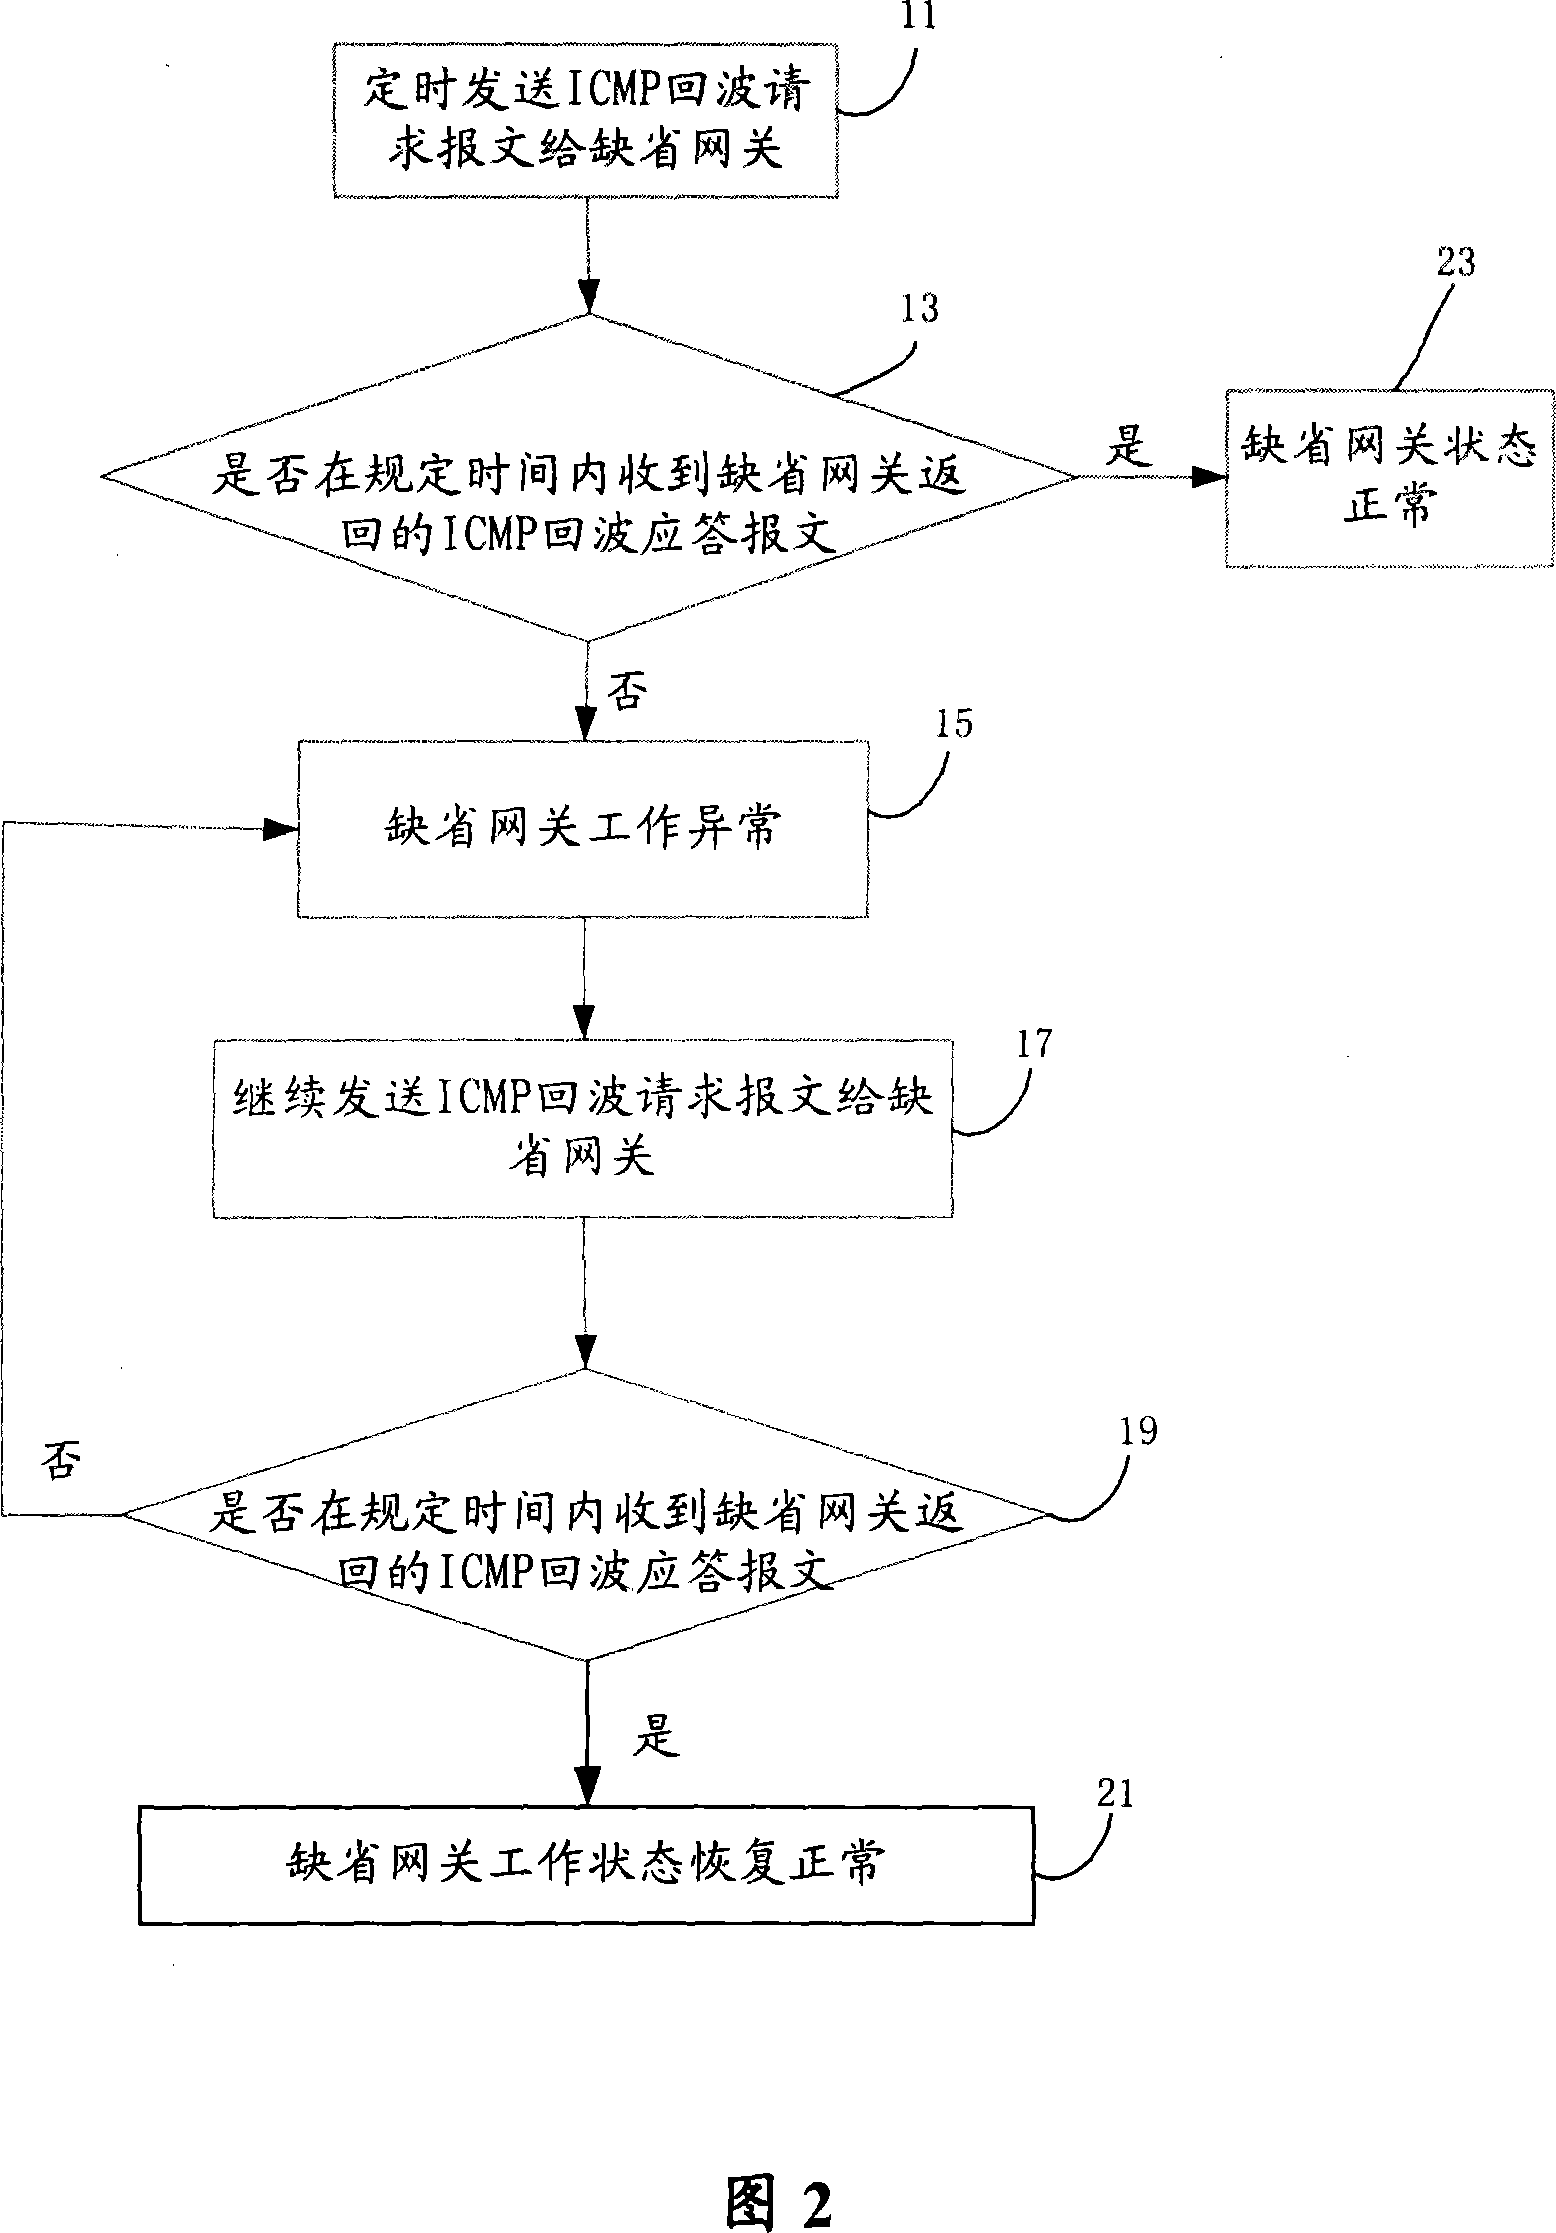 Method and system for detecting default gateway state